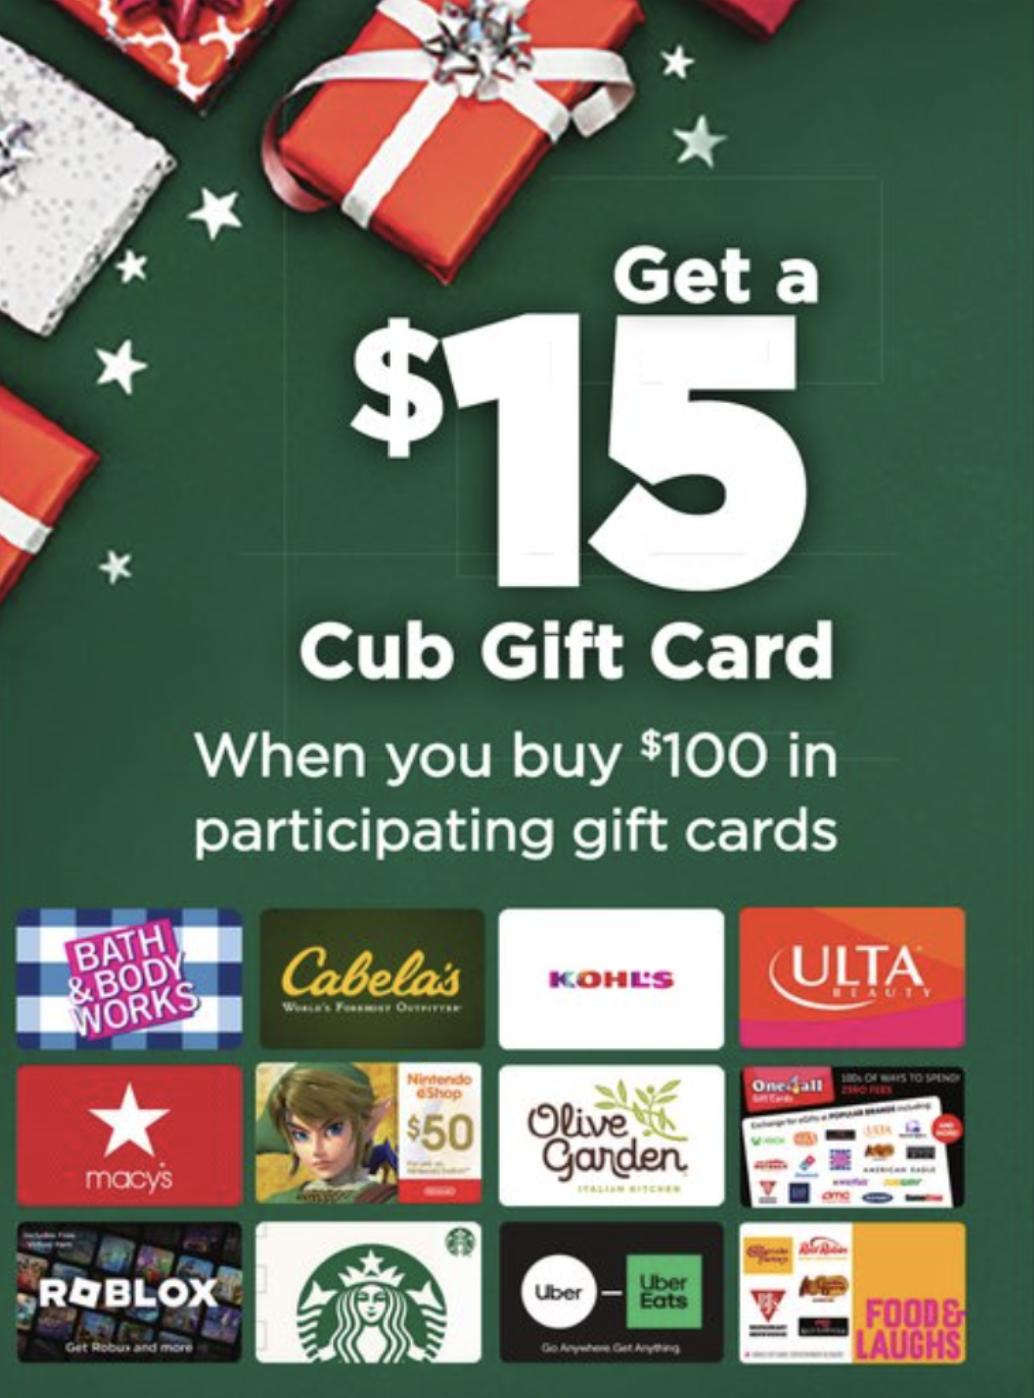 Cub $15 gift card offer.